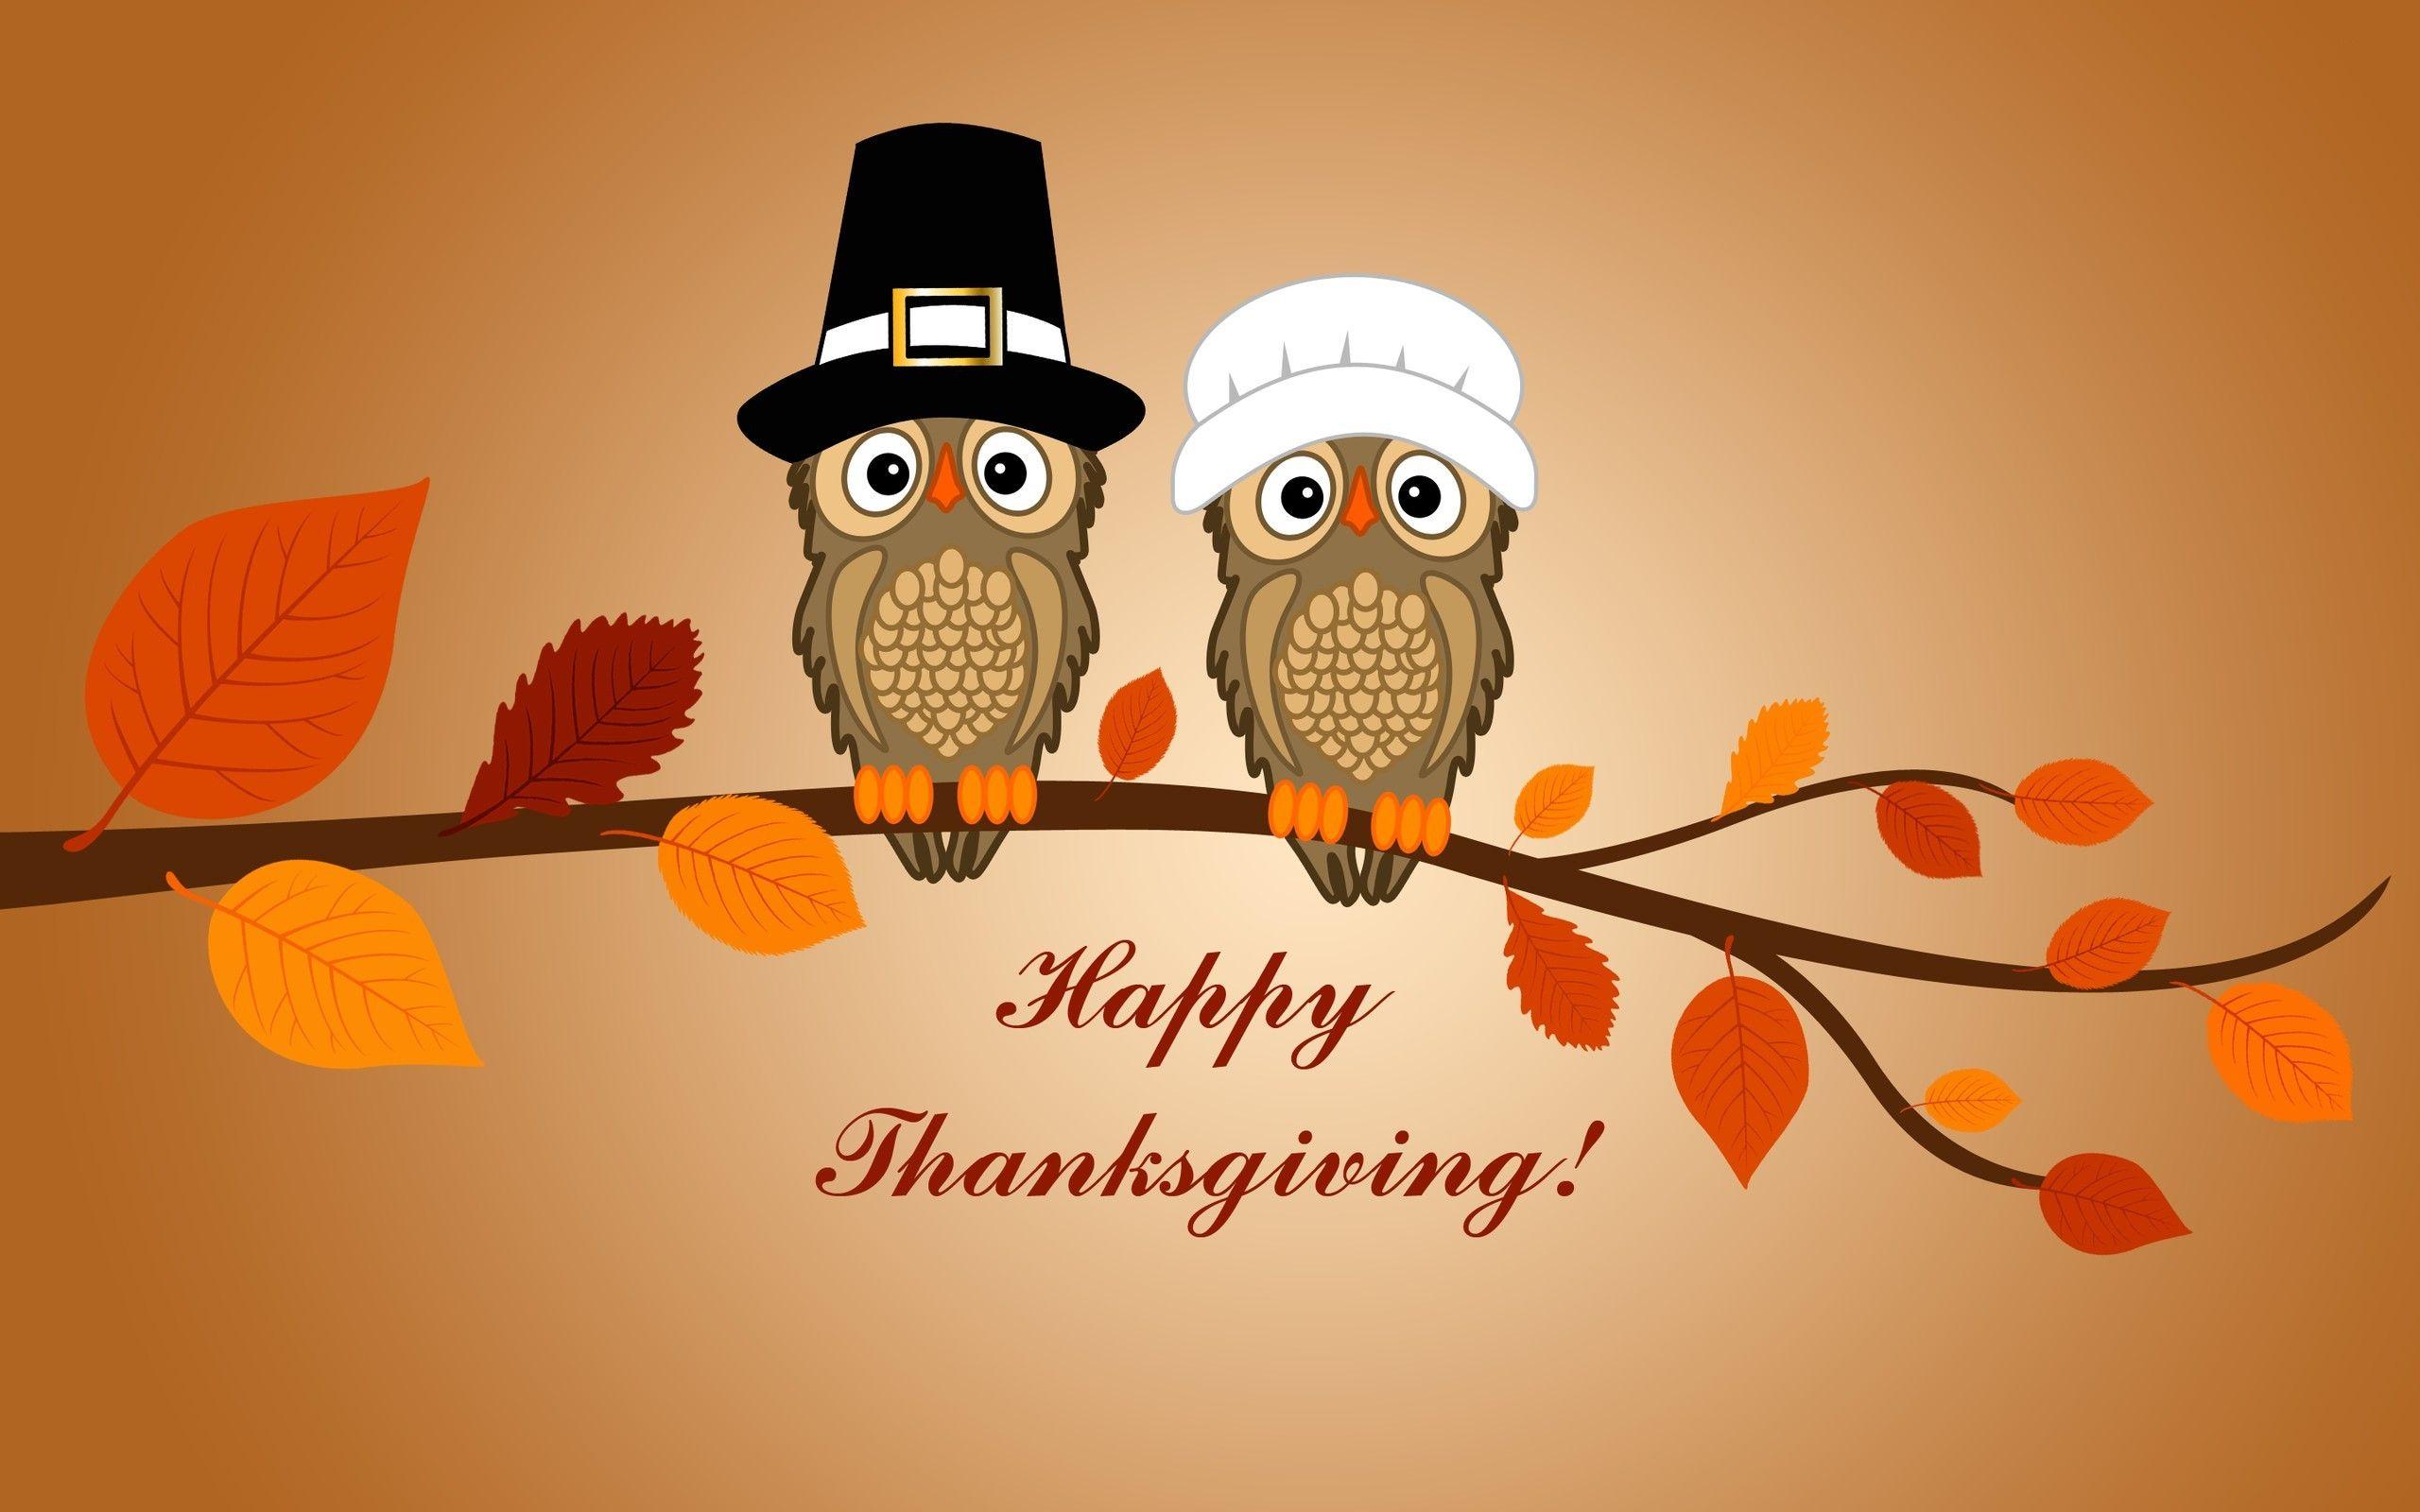 Thanksgiving Wallpaper Image In Collection